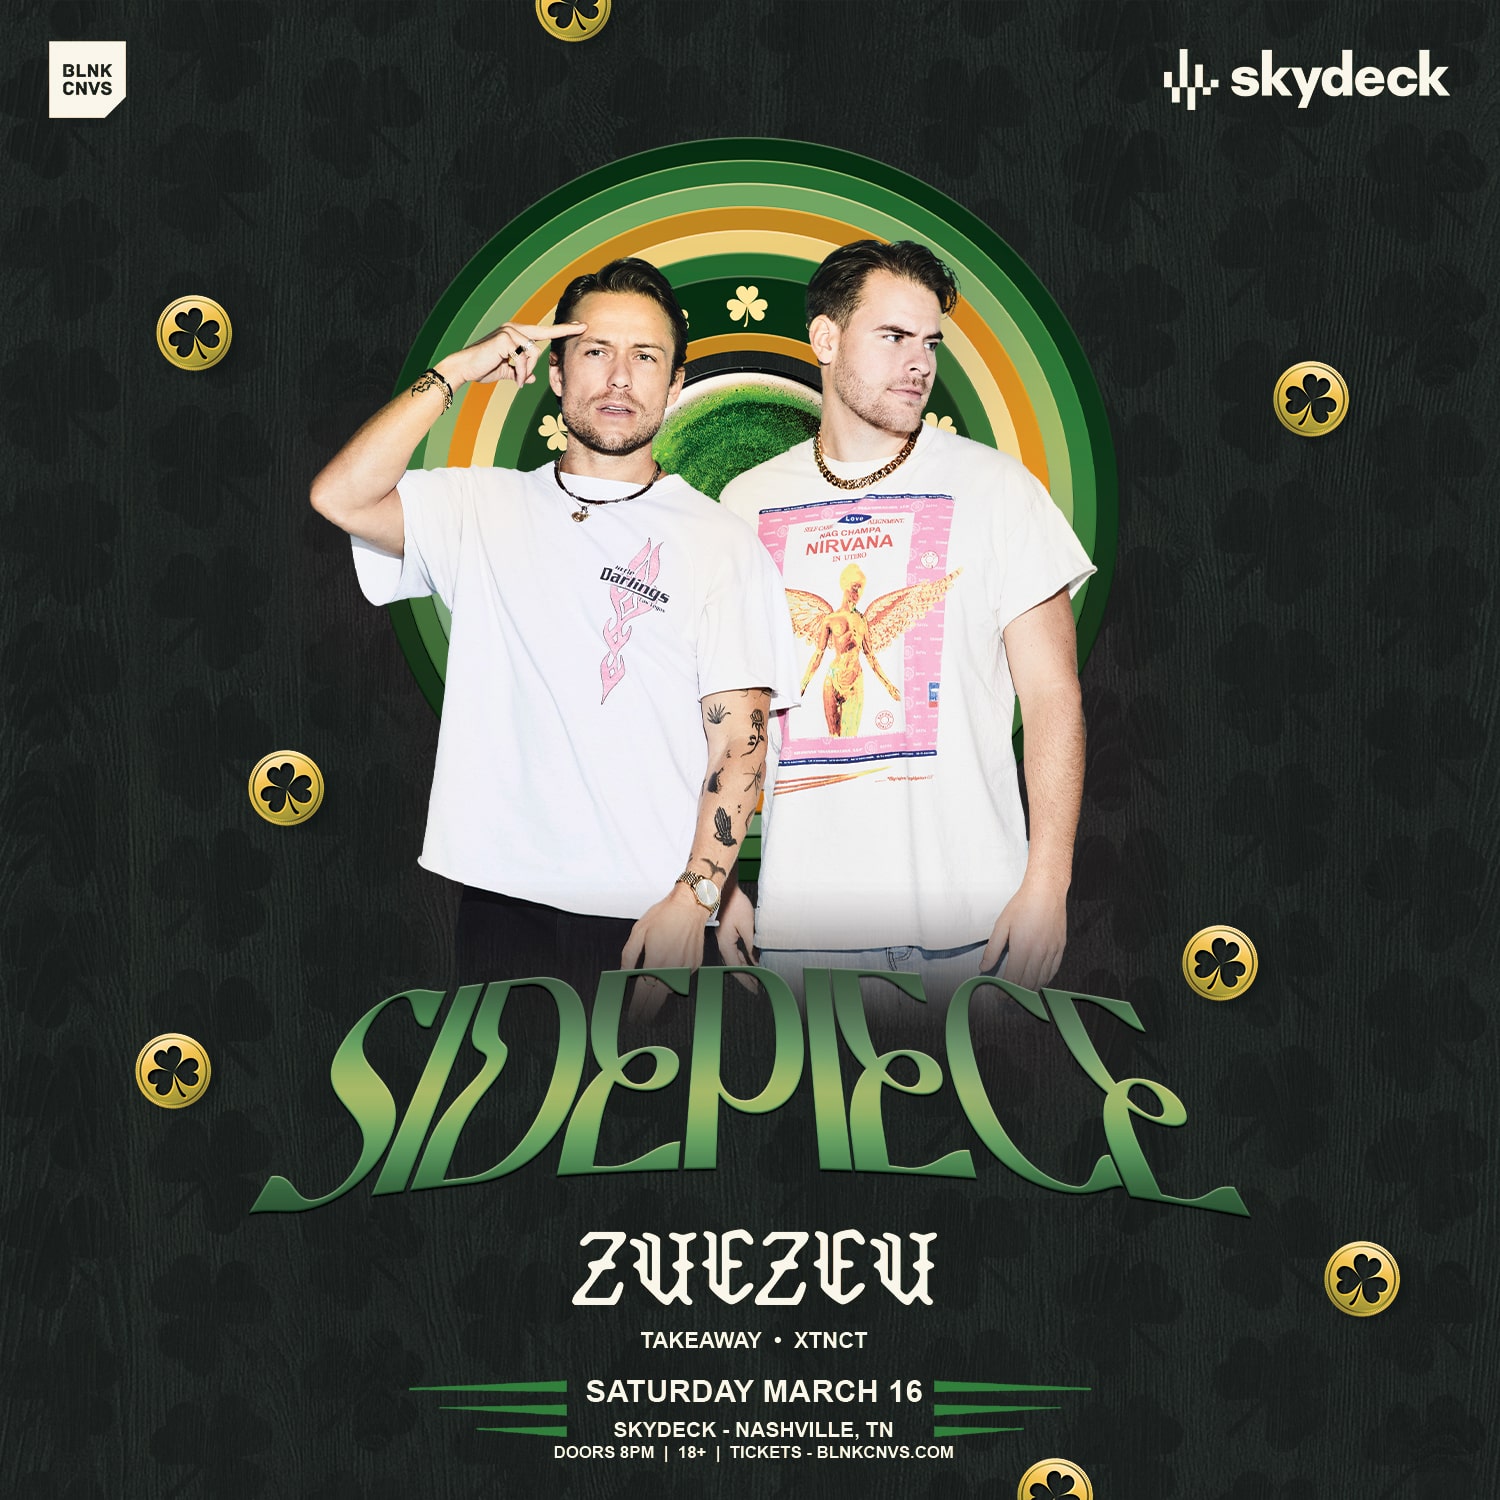 Promo image of SIDEPIECE @ SKYDECK (ST. PATTY’S DAY WEEKEND)